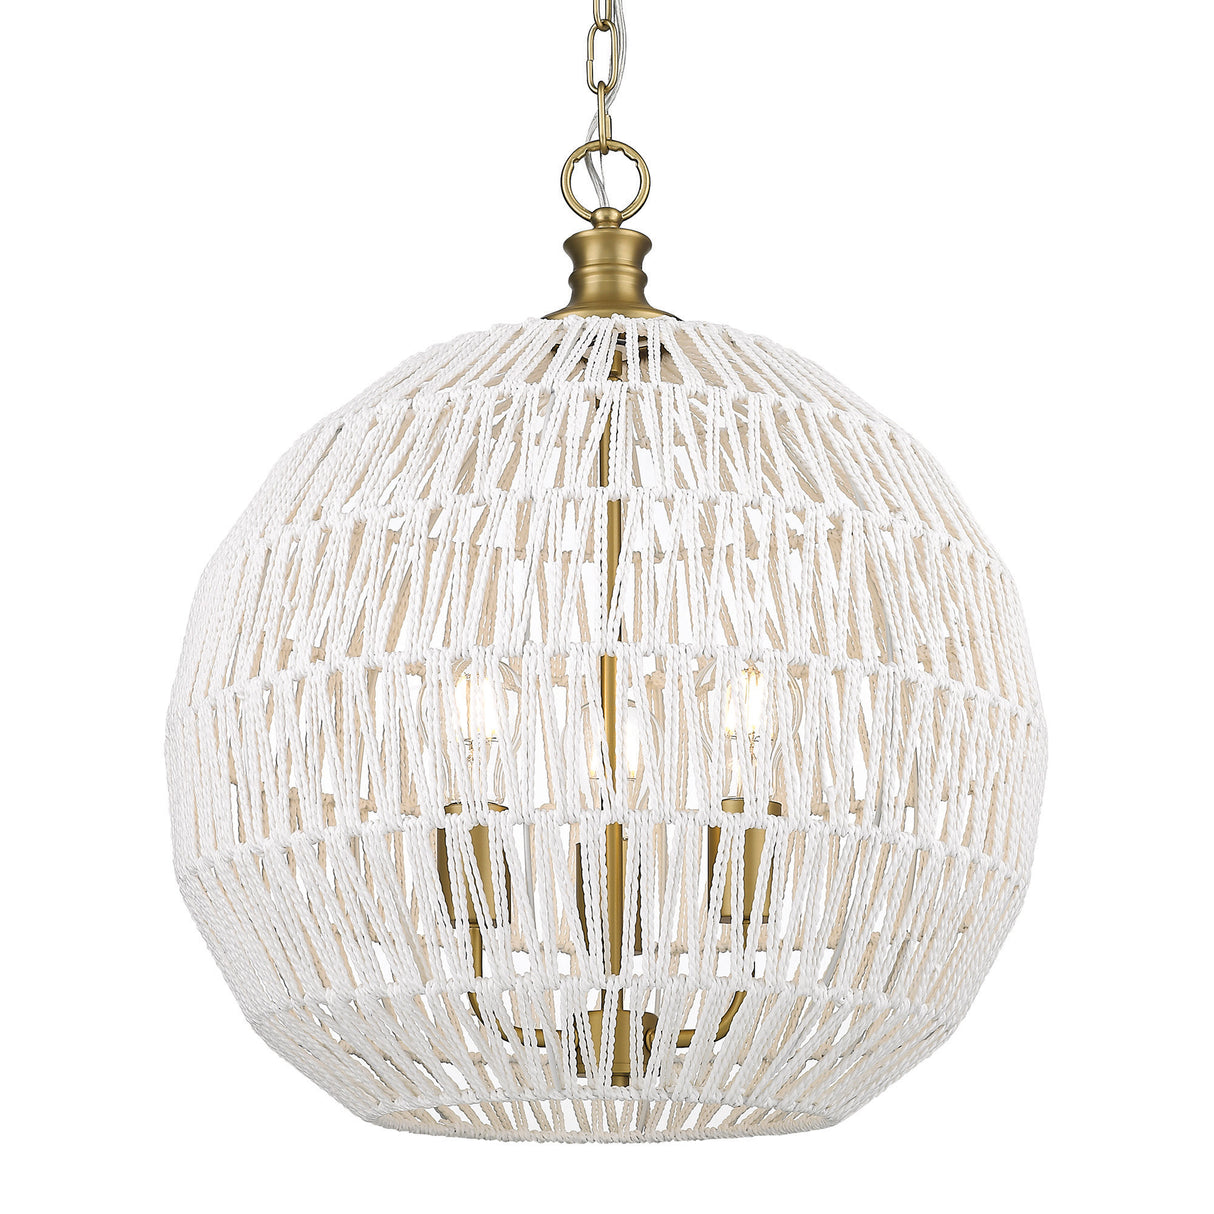 Florence 5-Light Pendant in Brushed Champagne Bronze and Bleached White Raphia Rope Shade